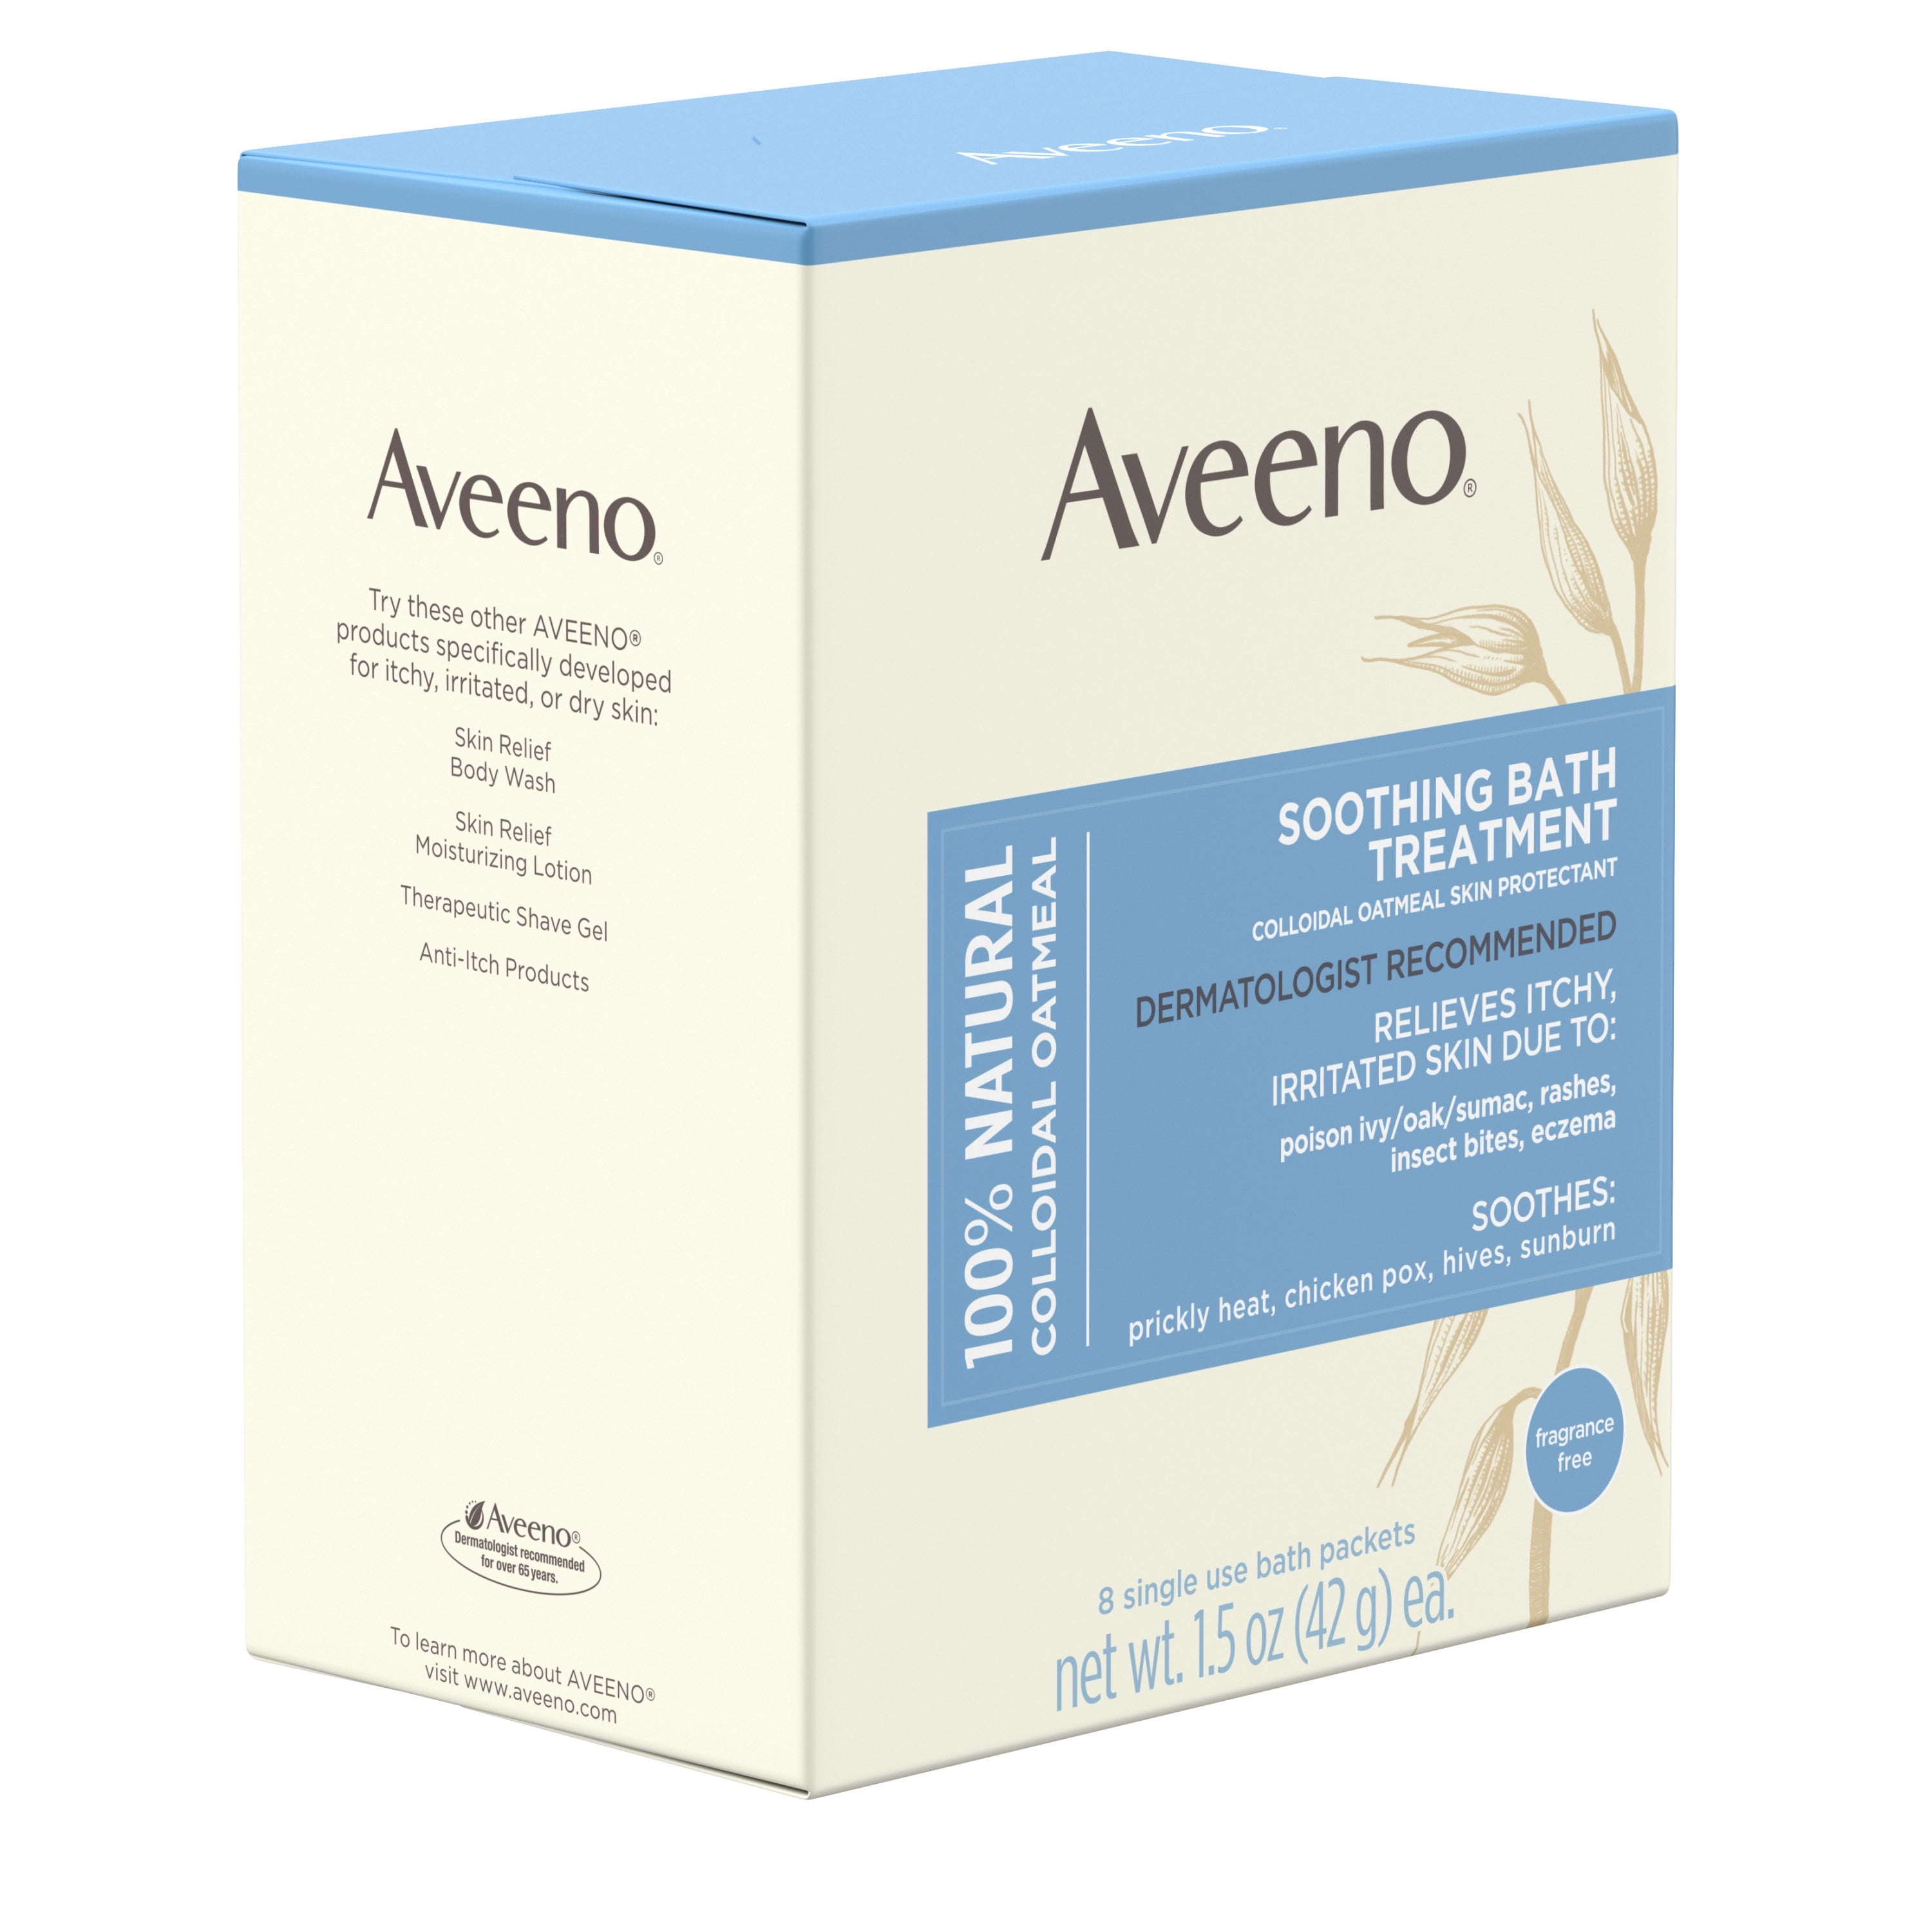 Aveeno Baby Oatmeal Bath Walmart : Aveeno Baby Eczema Therapy Soothing Bath Treatment Reviews 2021 - Johnson's first touch baby gift set.